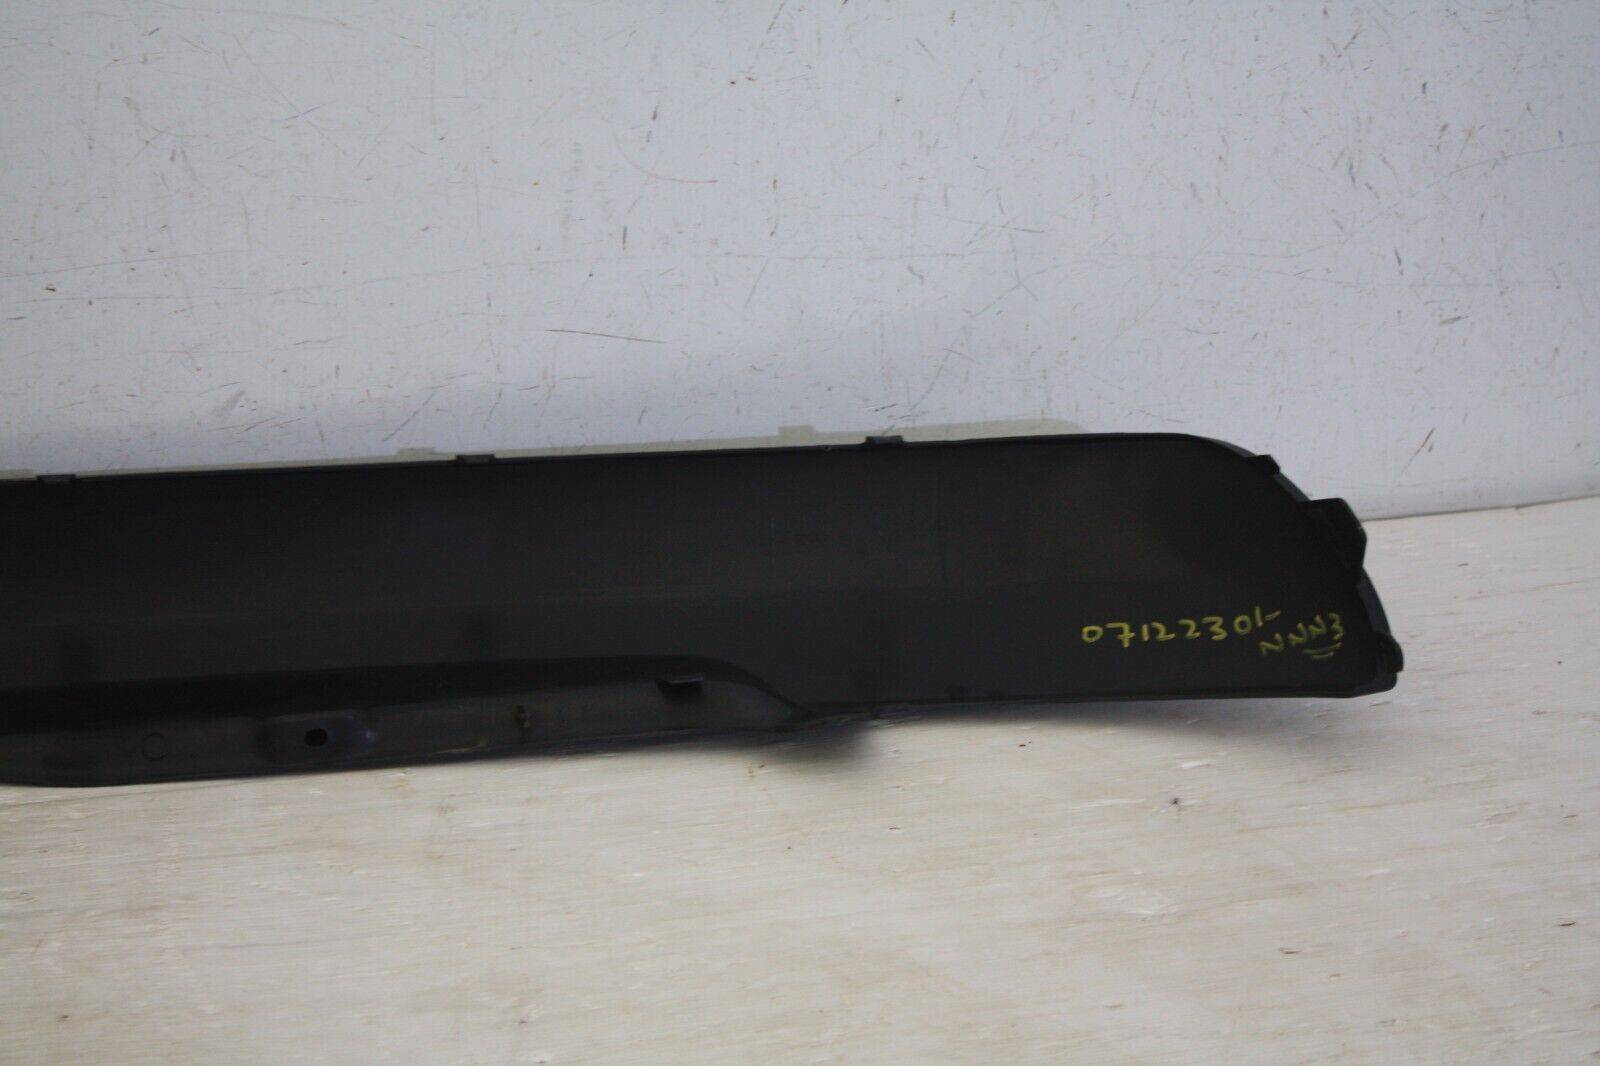 Renault-Clio-Rear-Bumper-Upper-Section-2001-TO-2005-8200083217-Genuine-176093485781-14